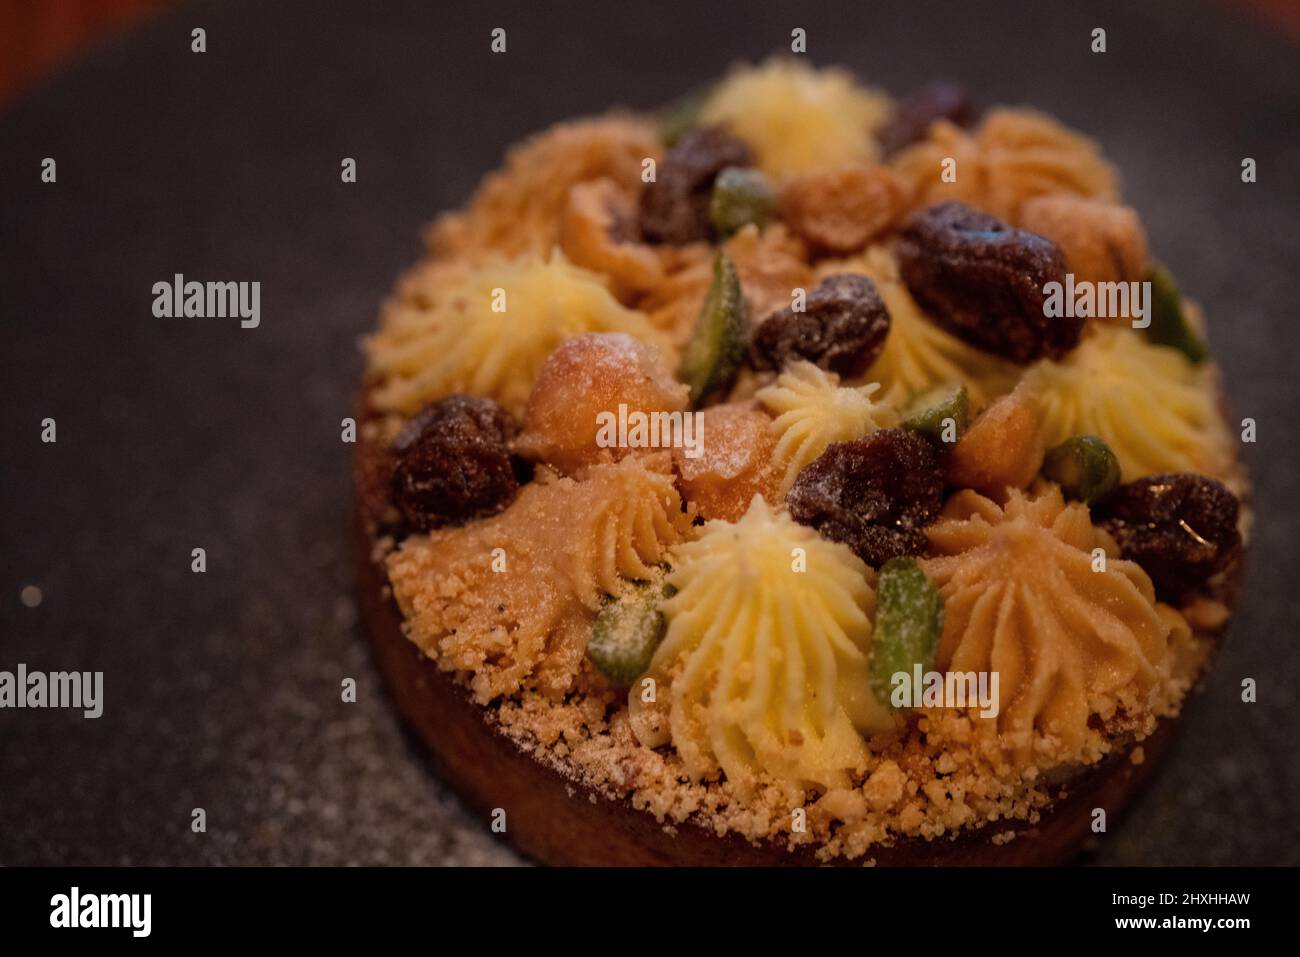 Small tart on the palte, with cream, nuts and raisins  on it. Stock Photo